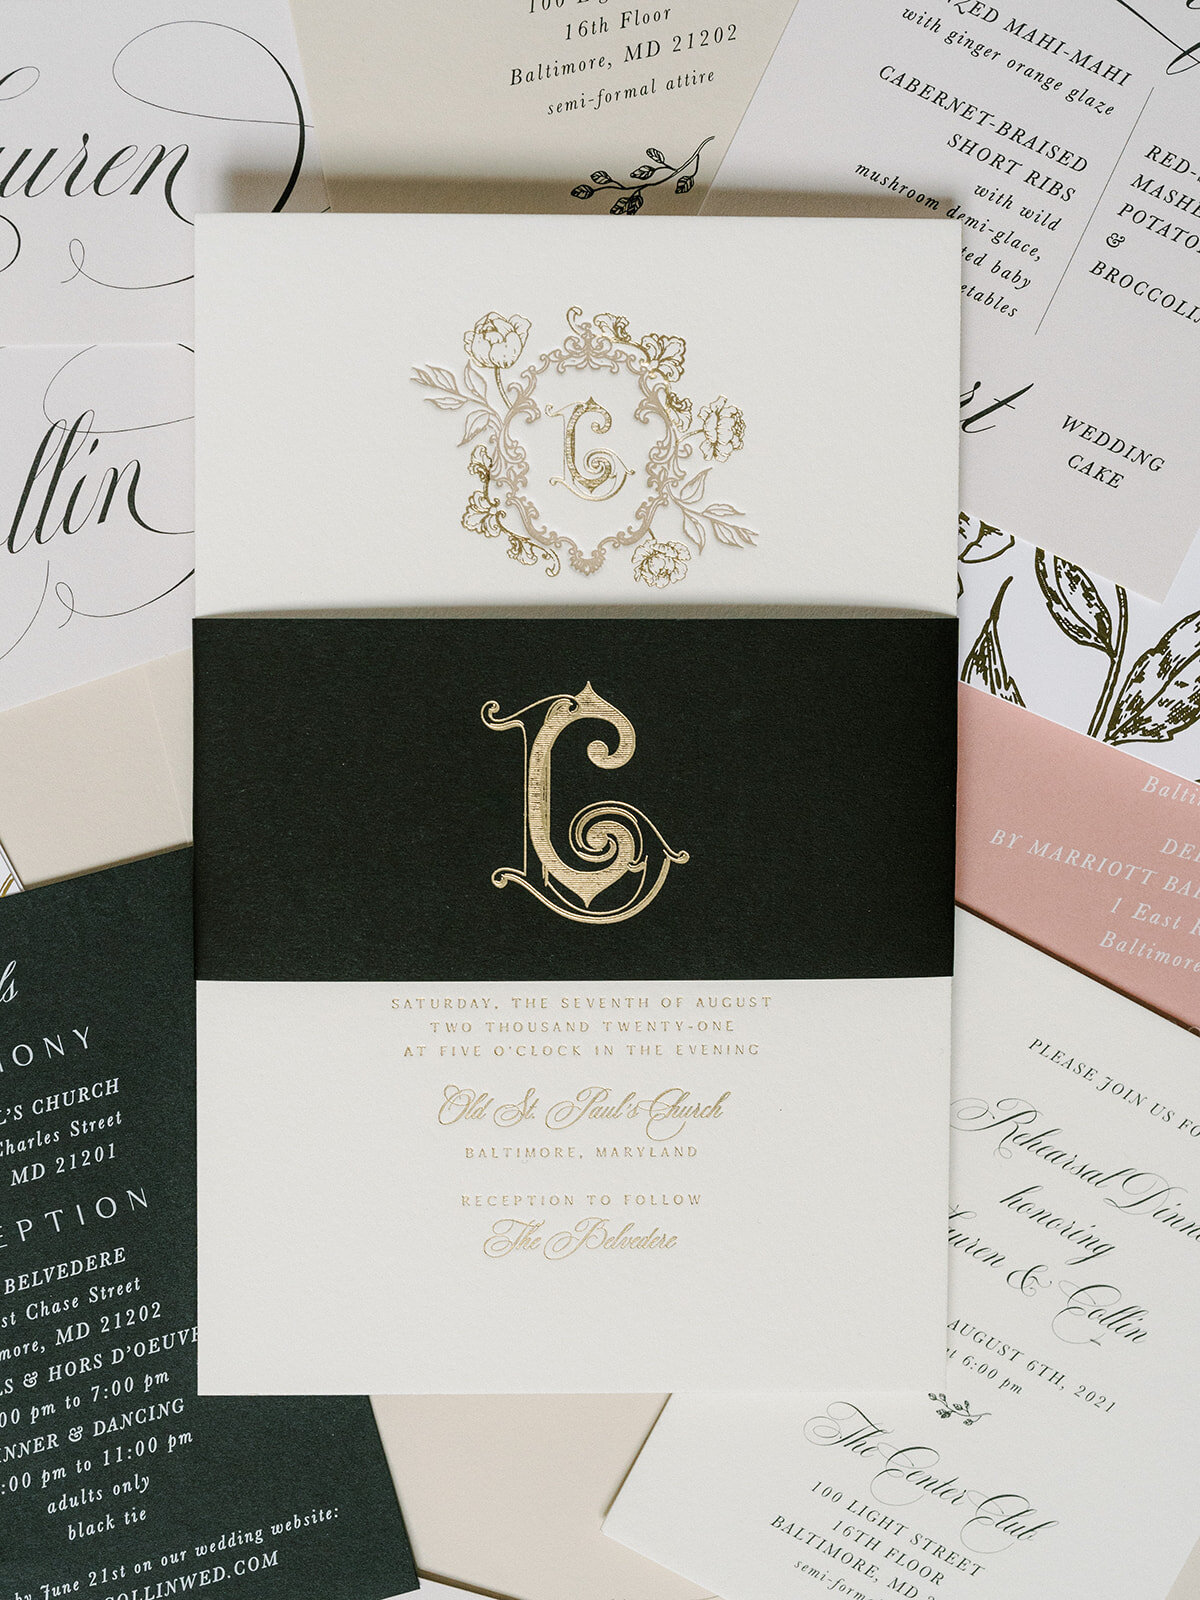 opulent letterpress wedding invitation with floral monogram and black belly band by emily baird